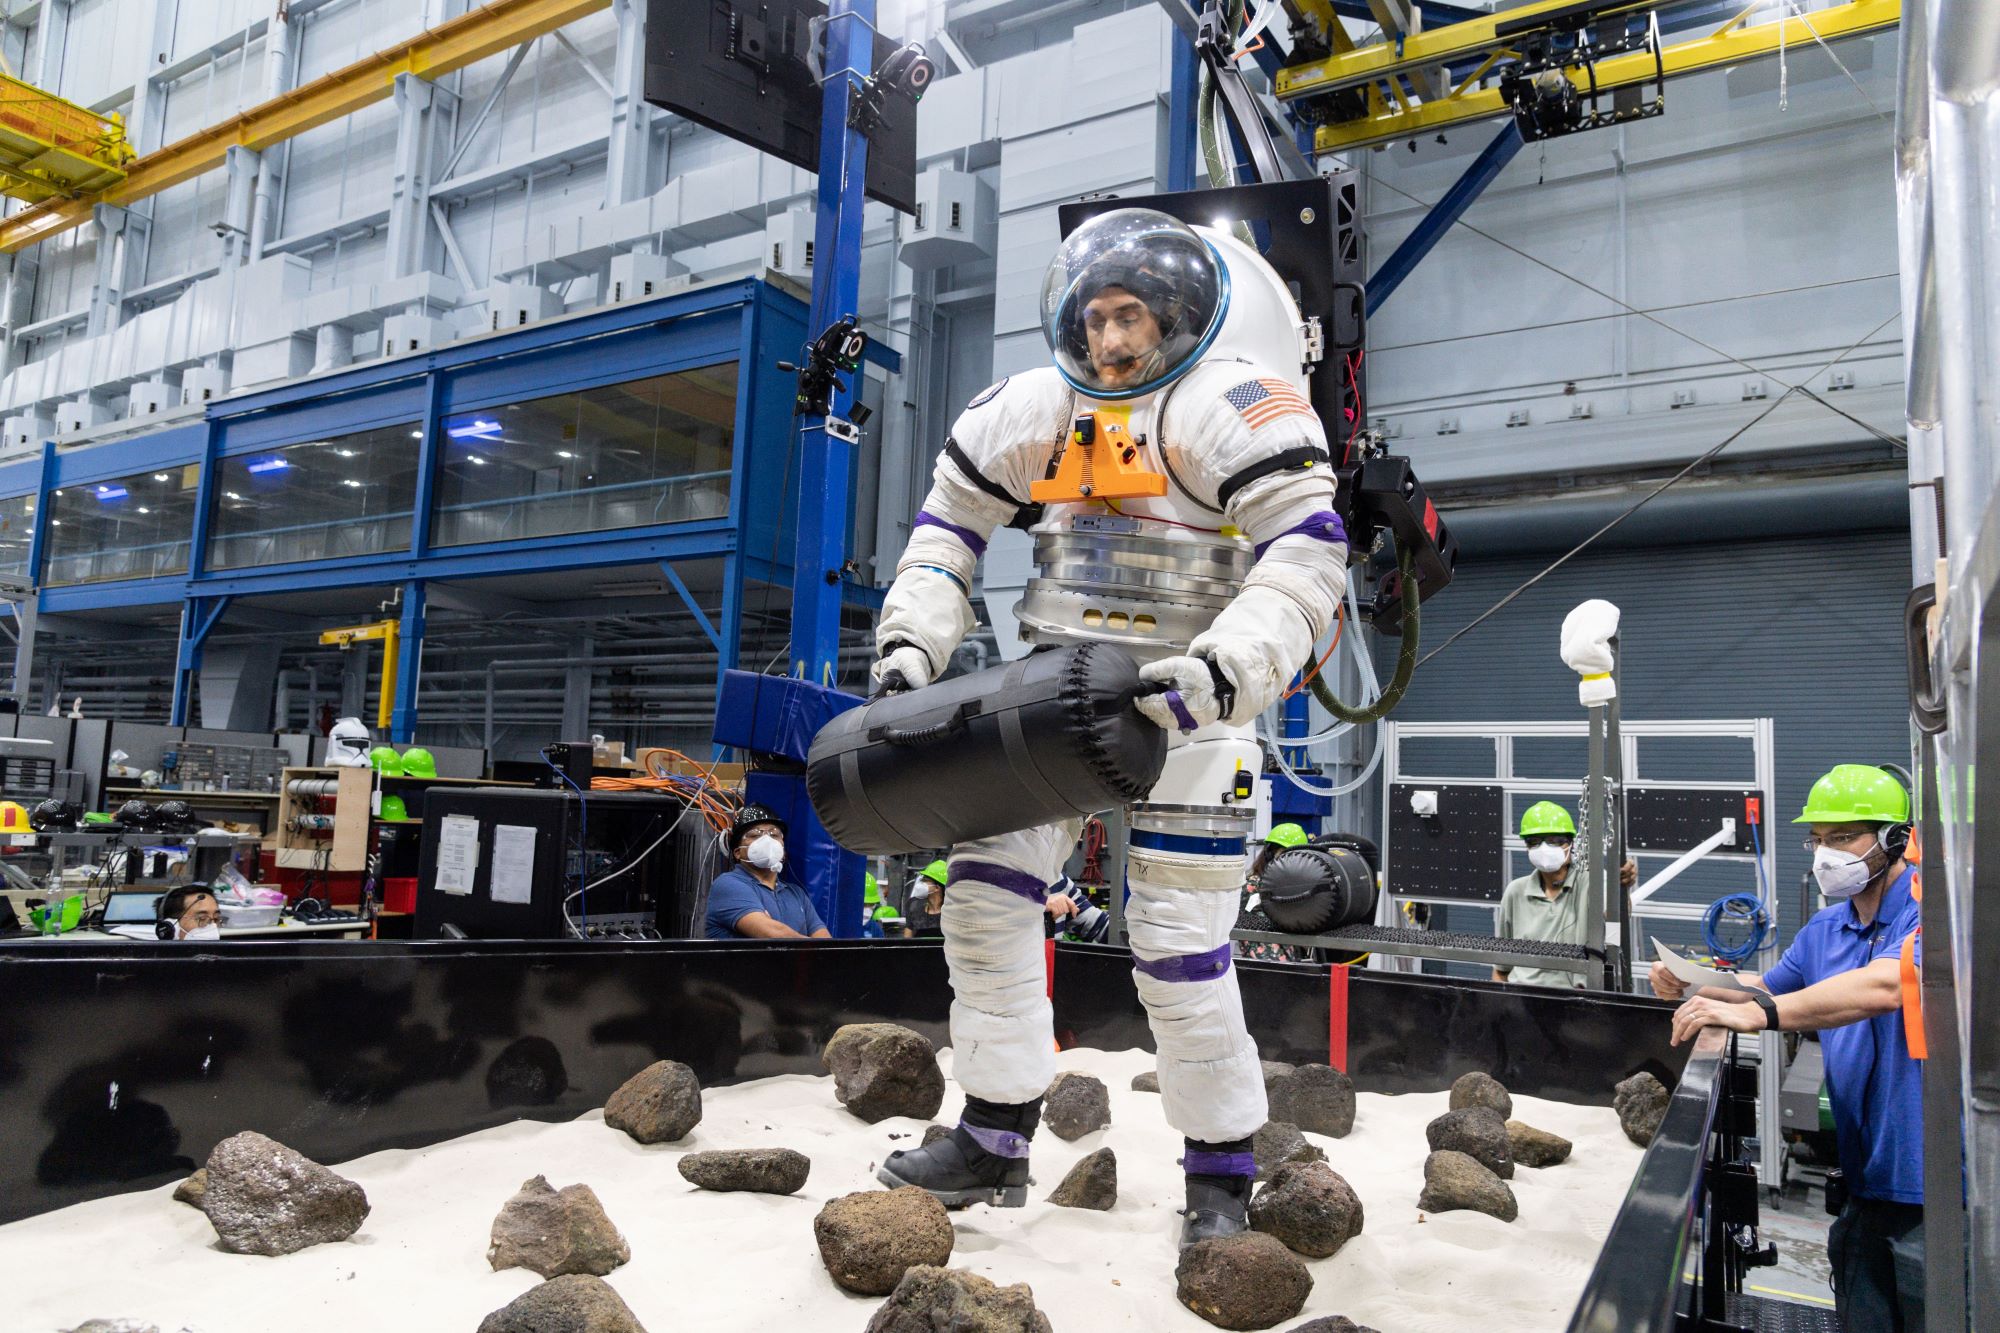 A volunteer from NASA’s Artemis Extravehicular Activity training group moves a 30-pound object through a boulder field while in a spacesuit connected to NASA’s Active Response Gravity Offload System, or ARGOS to test astronauts balance when they return to Earth from space.